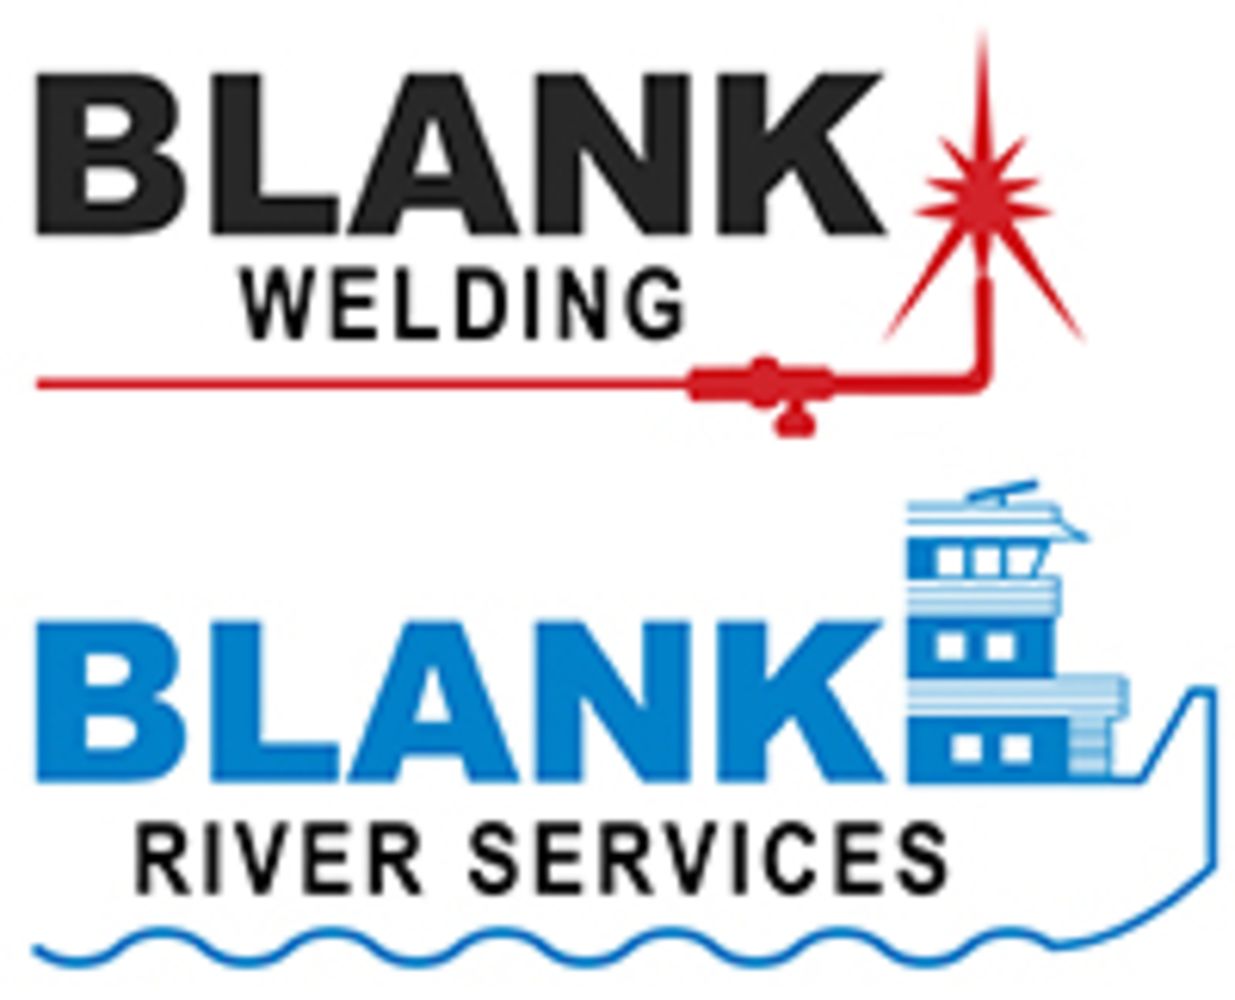 Complete Closure of Historic Inland Welding & Ship Repair Facility – Blank Welding & Blank River Services